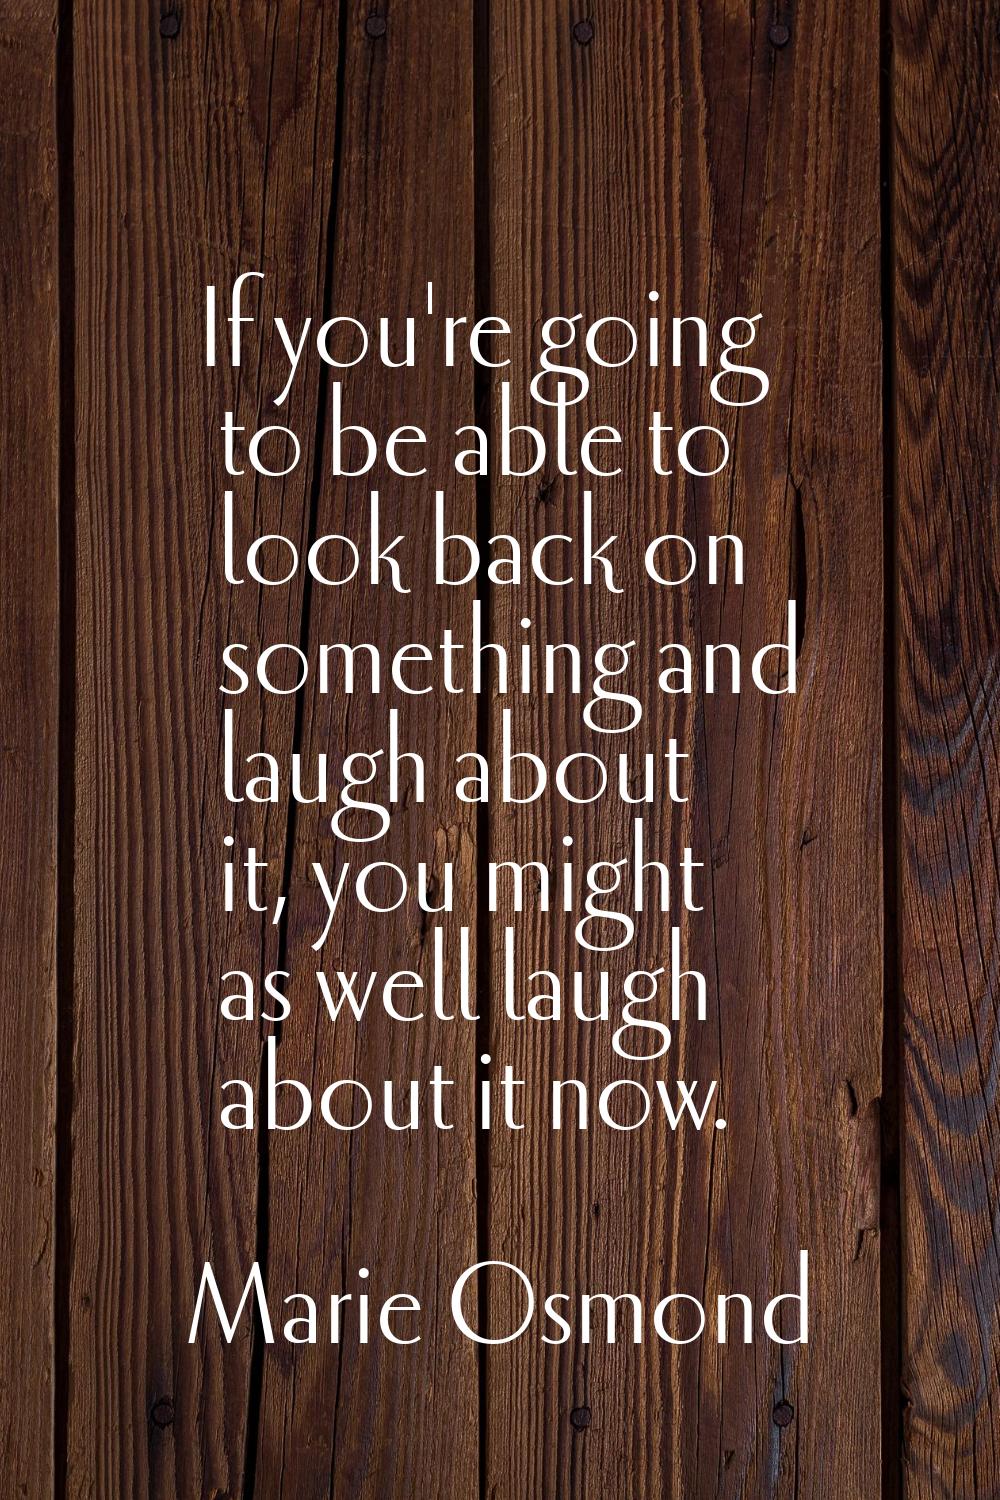 If you're going to be able to look back on something and laugh about it, you might as well laugh ab